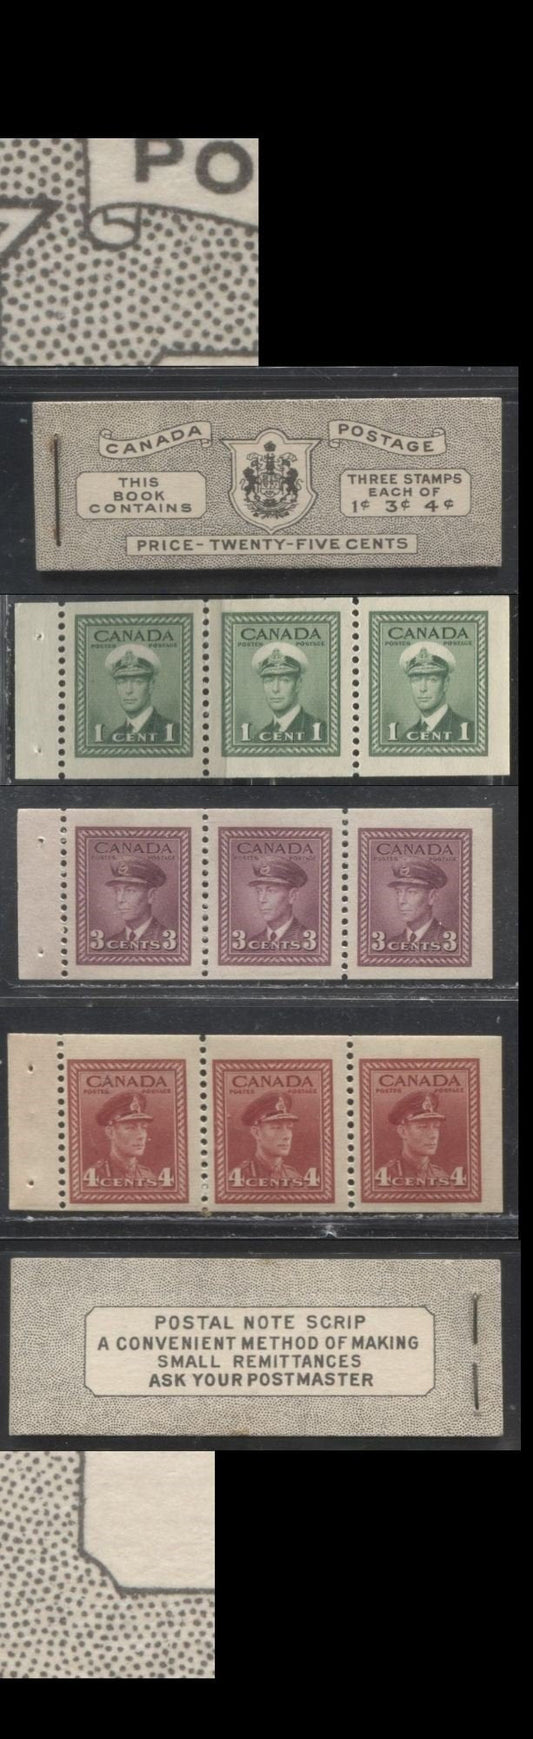 Lot 97 Canada #BK38a 1942-1949 War Issue Complete 25c, English Booklet Containing 1 Pane Each of 3 of 1c Green, 3c Rosy Plum and 4c Carmine Red, Horizontal Ribbed Paper, Harris Front Cover Type IVa , Back Cover Haii, 7c & 6c Rate Page